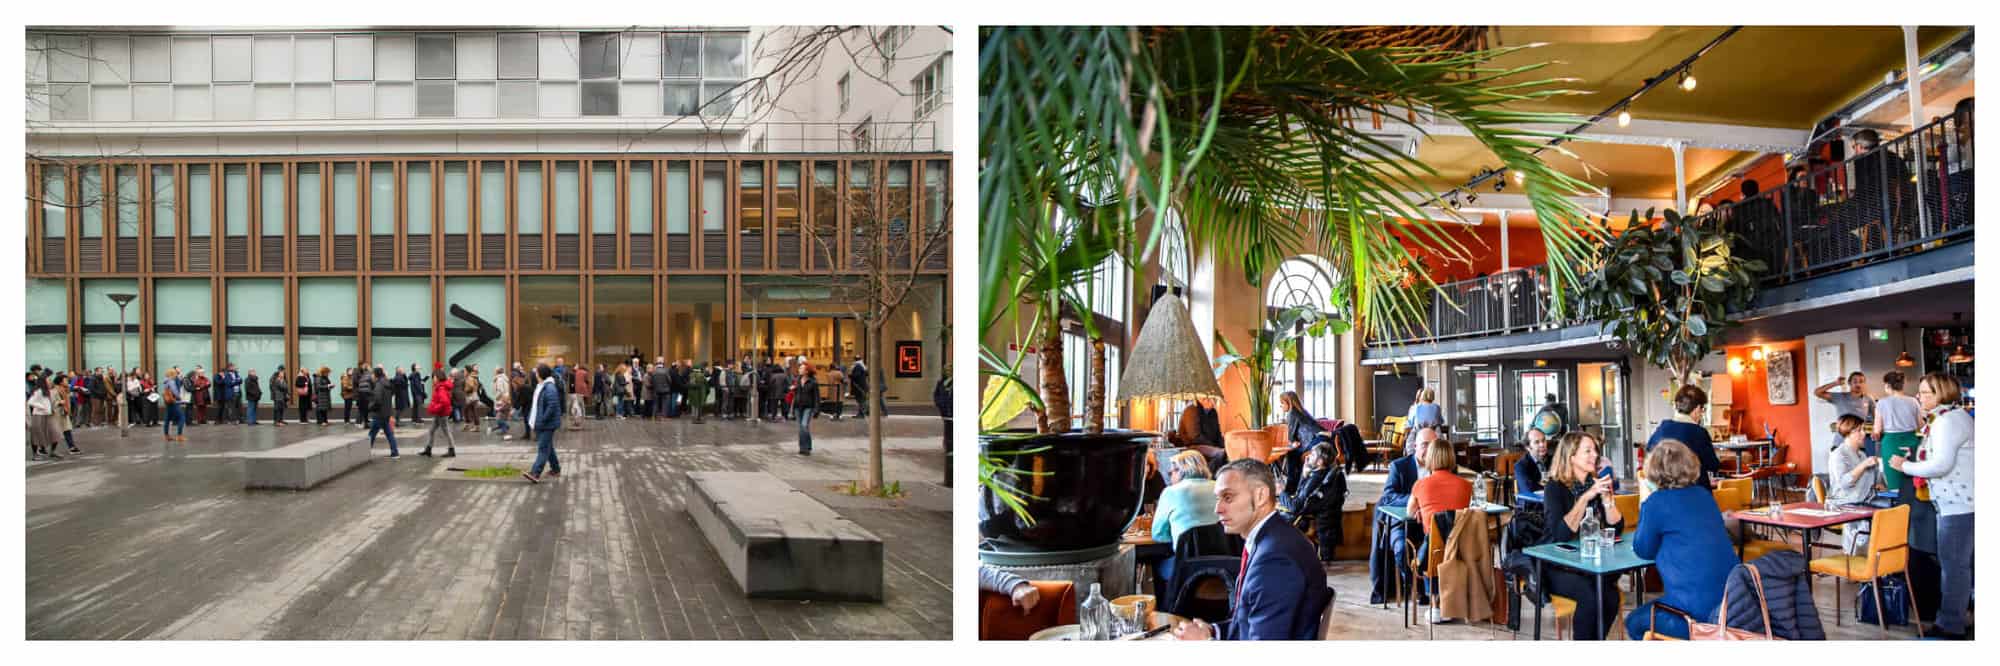 Left: a large line of people waiting to get into an art gallery. The building features large and tall windows across the front of it. Right: the interior of a crowded restaurant. There is a green plant to the left and a balcony with more seating and people in the right upper corner.